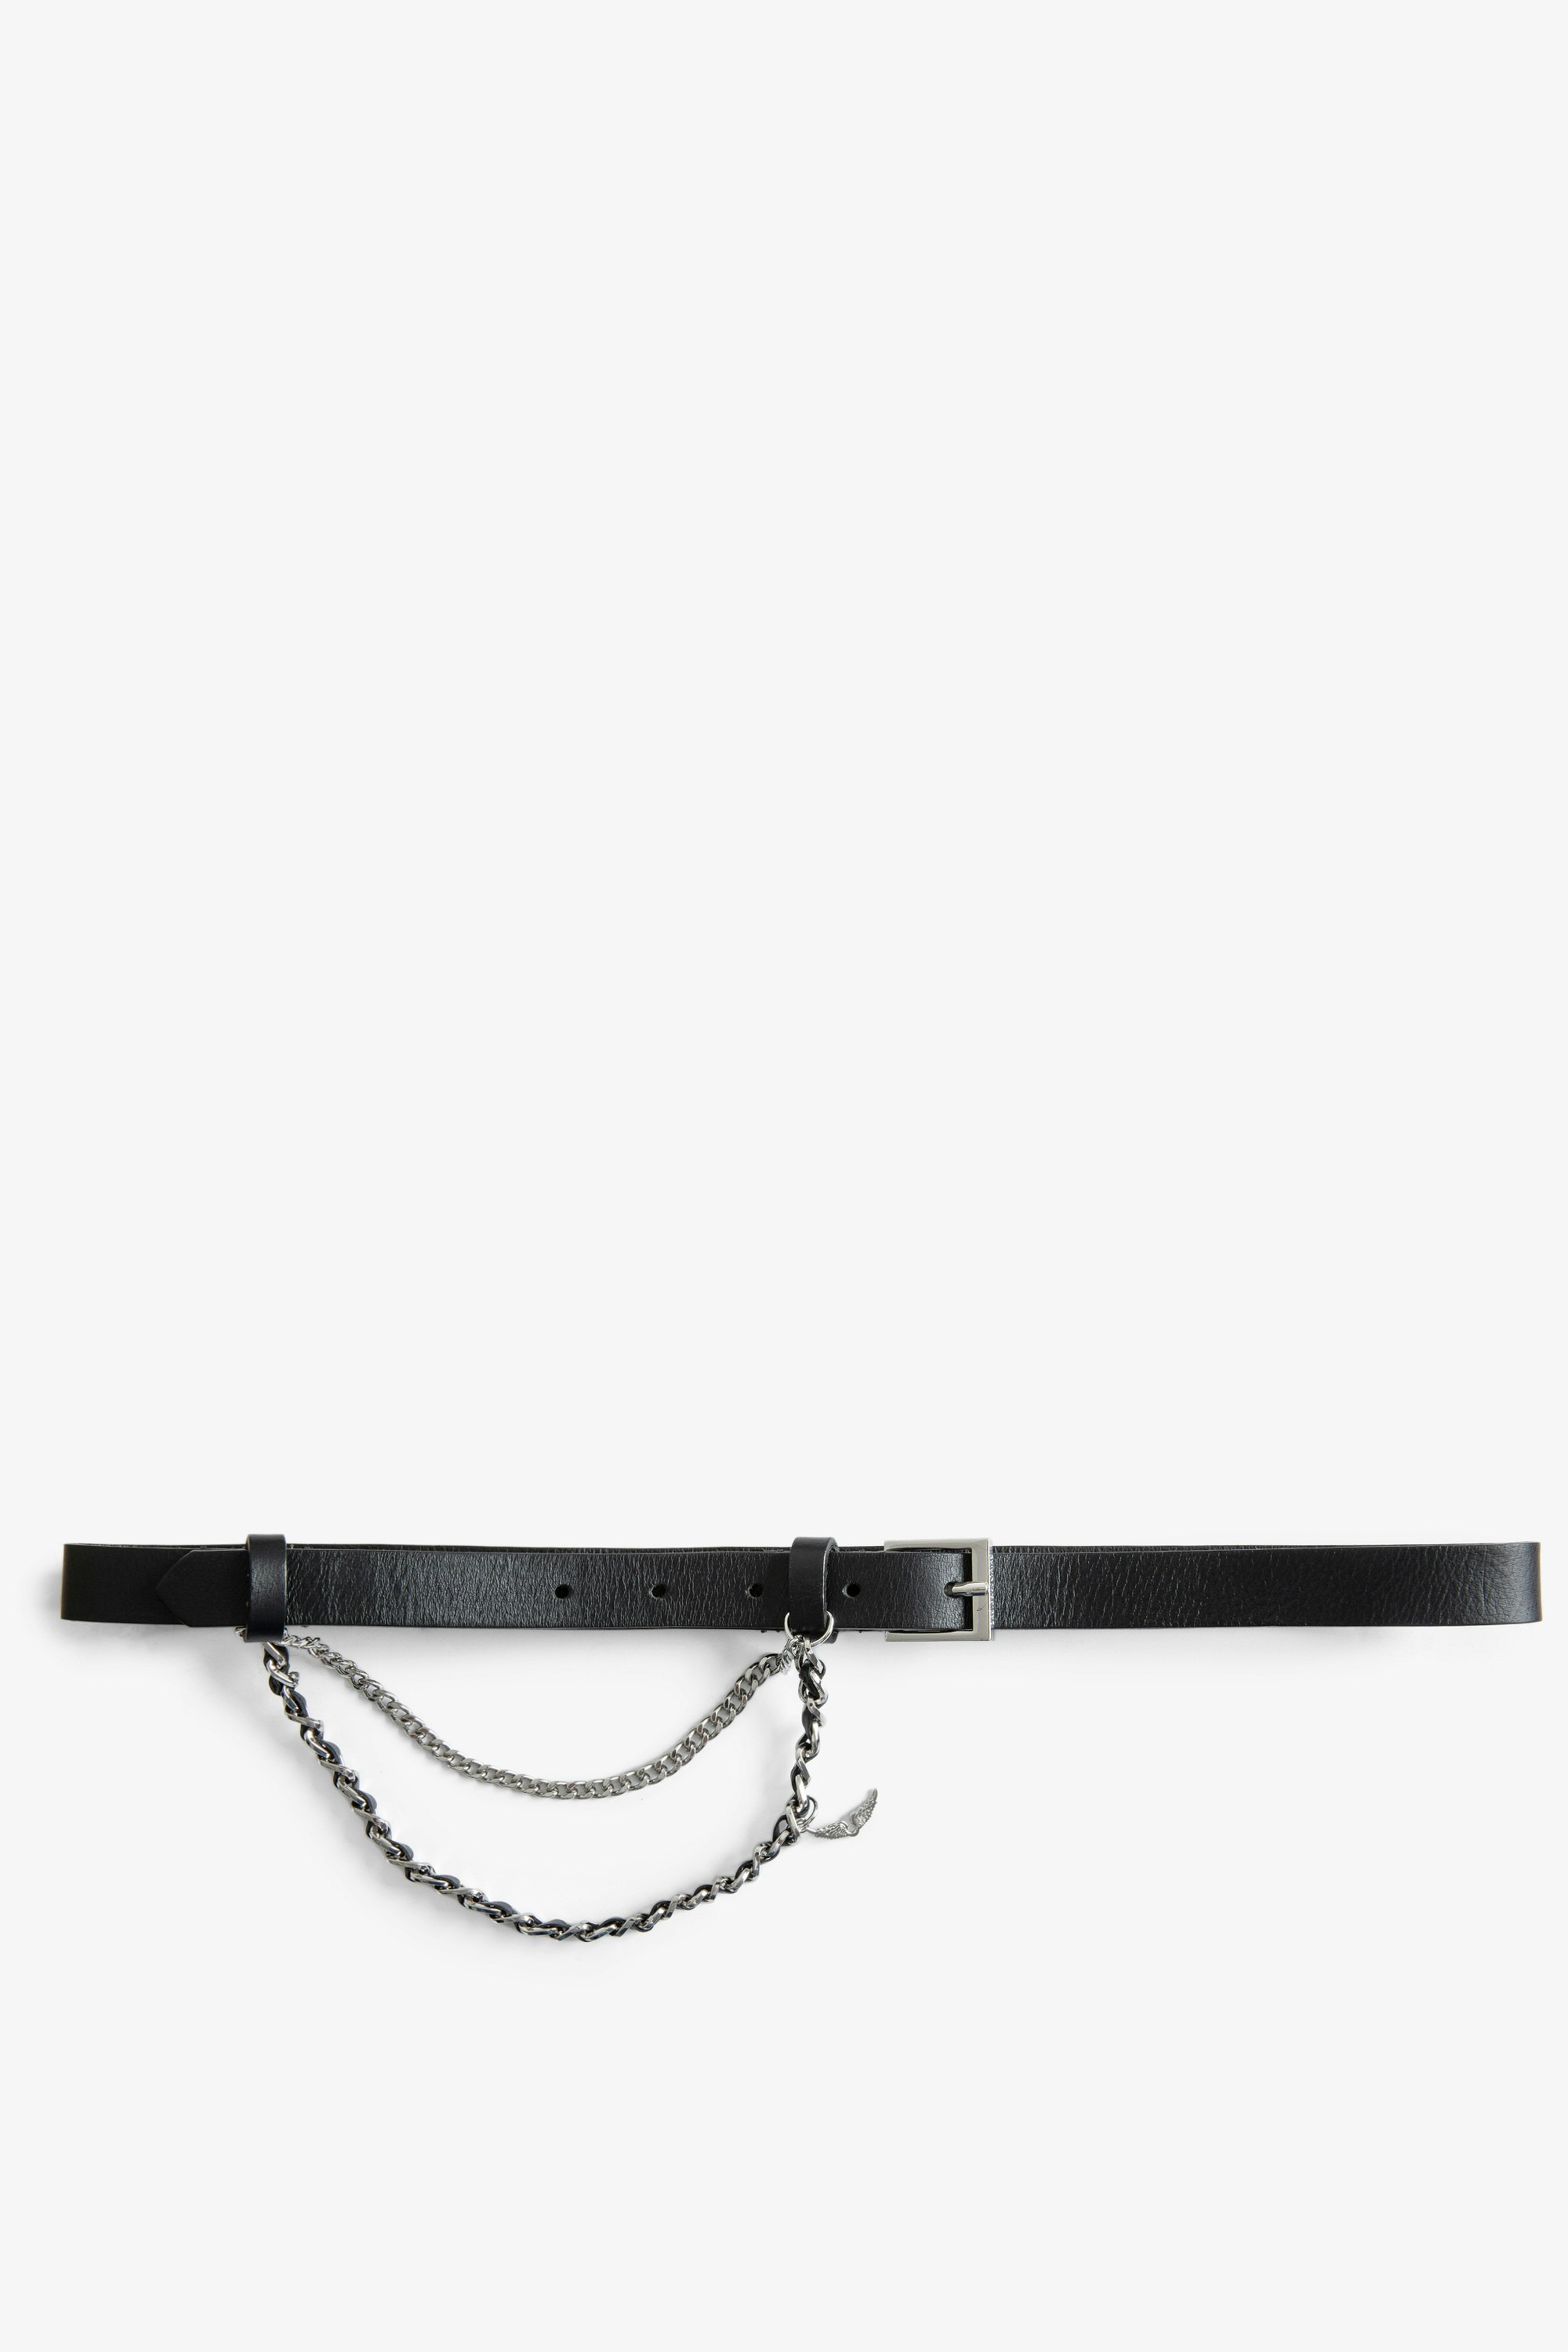 Rock Chain ベルト Woman’s Zadig&Voltaire black leather belt with silver chain.